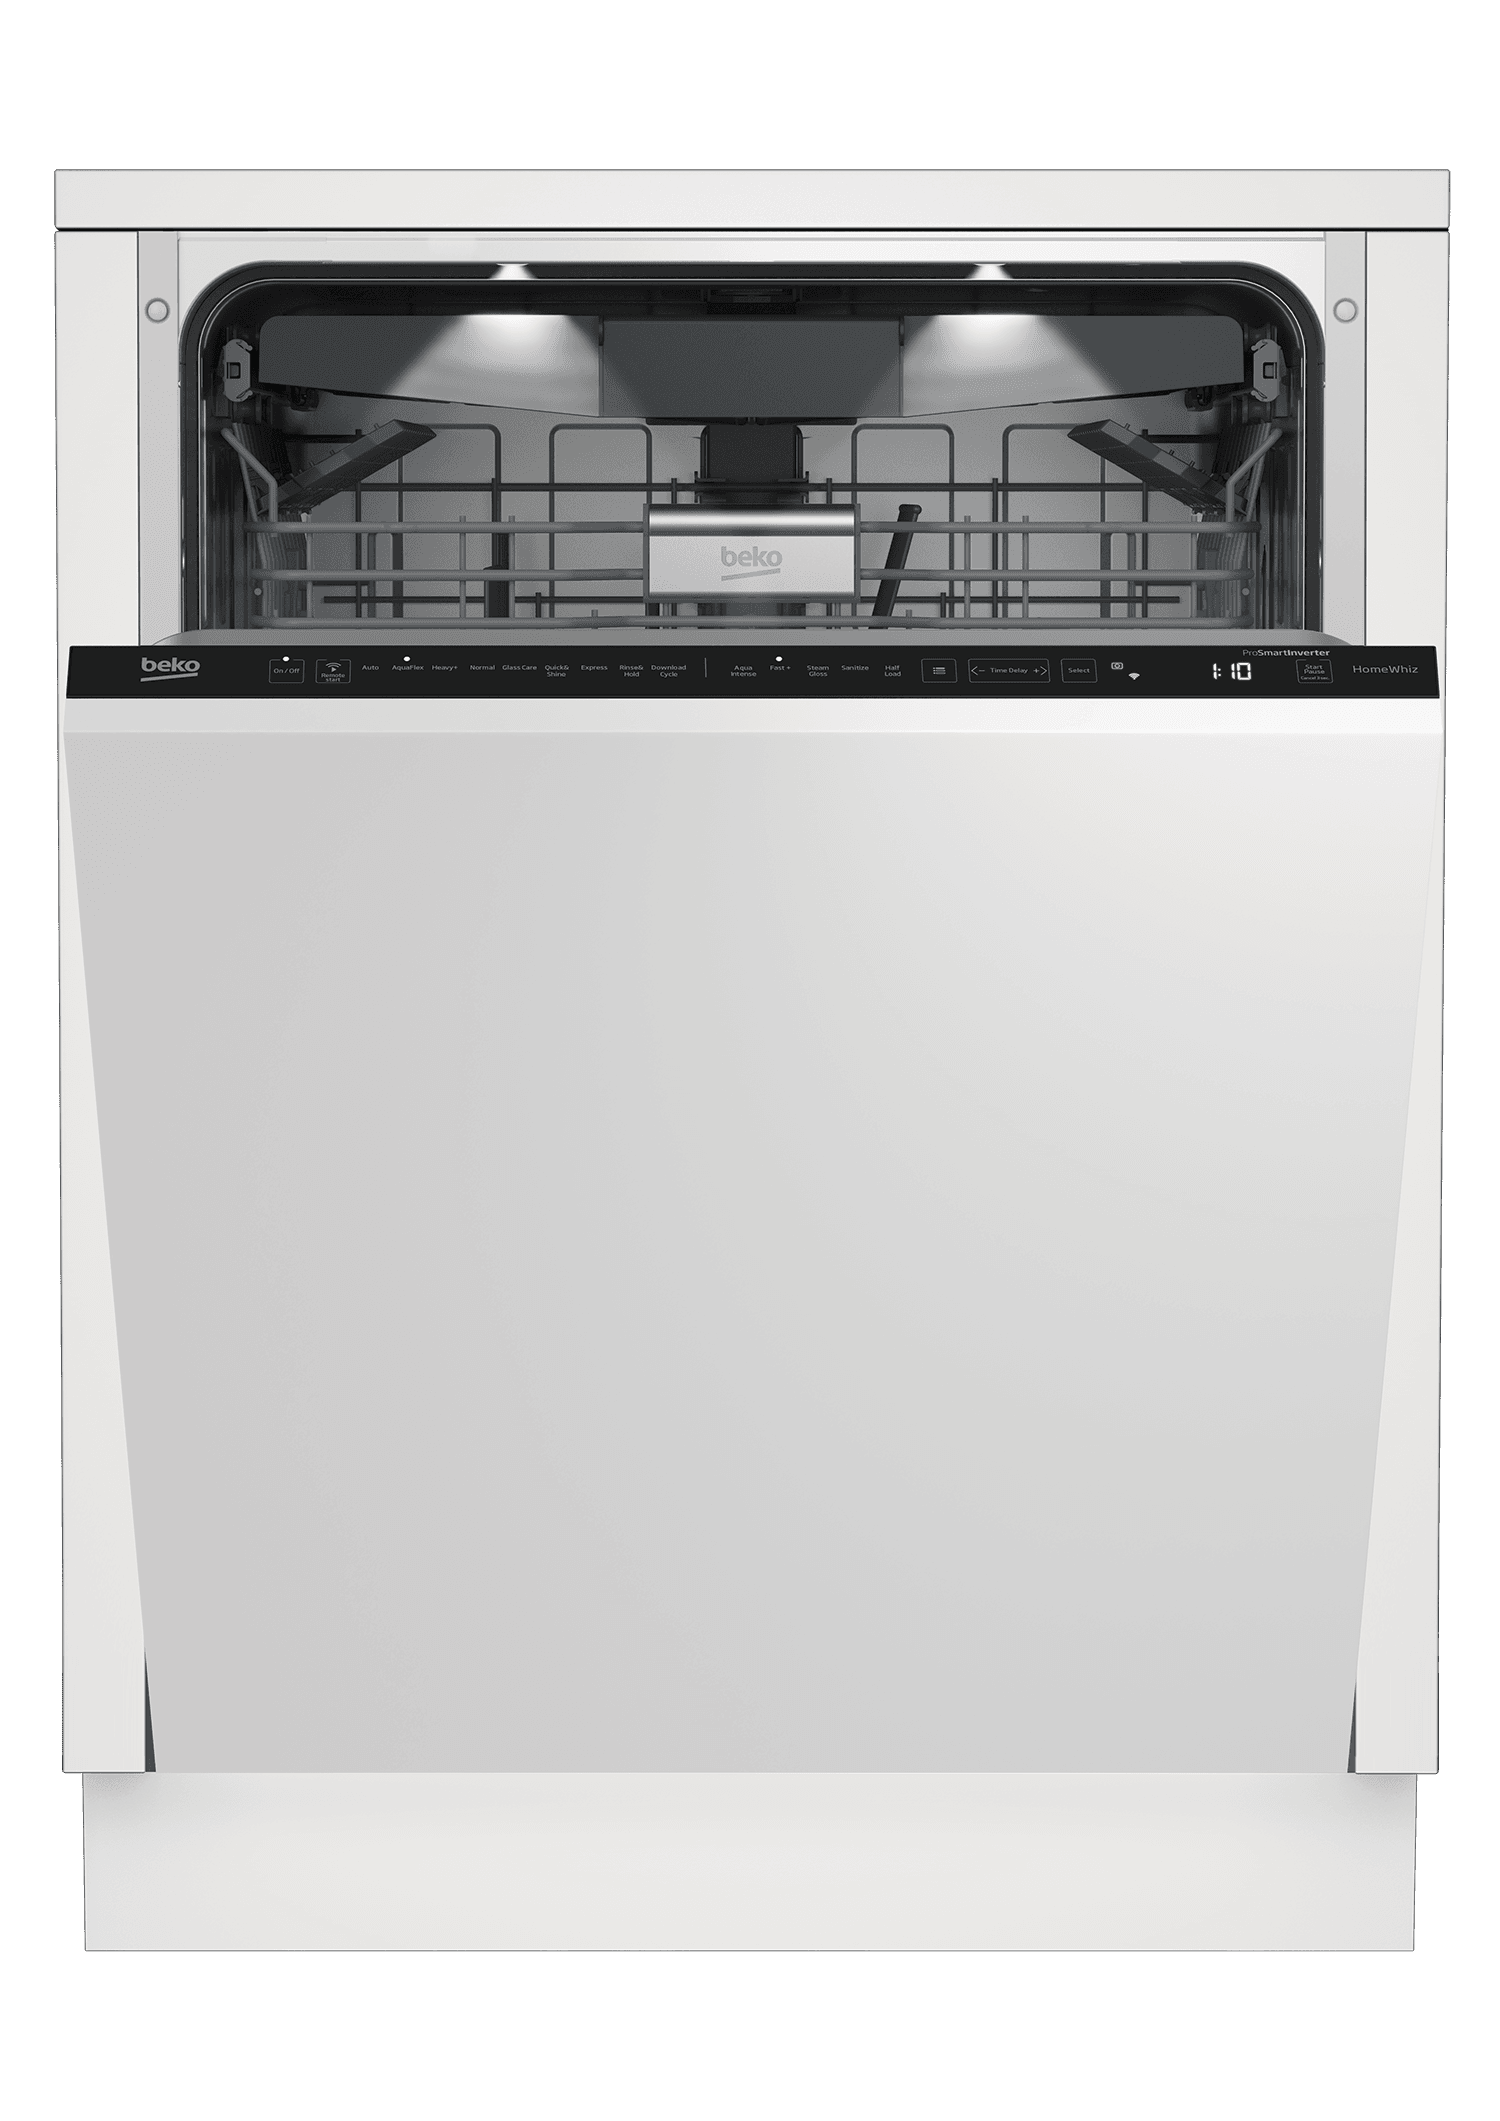 Beko DIT39432 Tall Tub Dishwasher, 16 Place Settings, 39 Dba, Fully Integrated Panel Ready